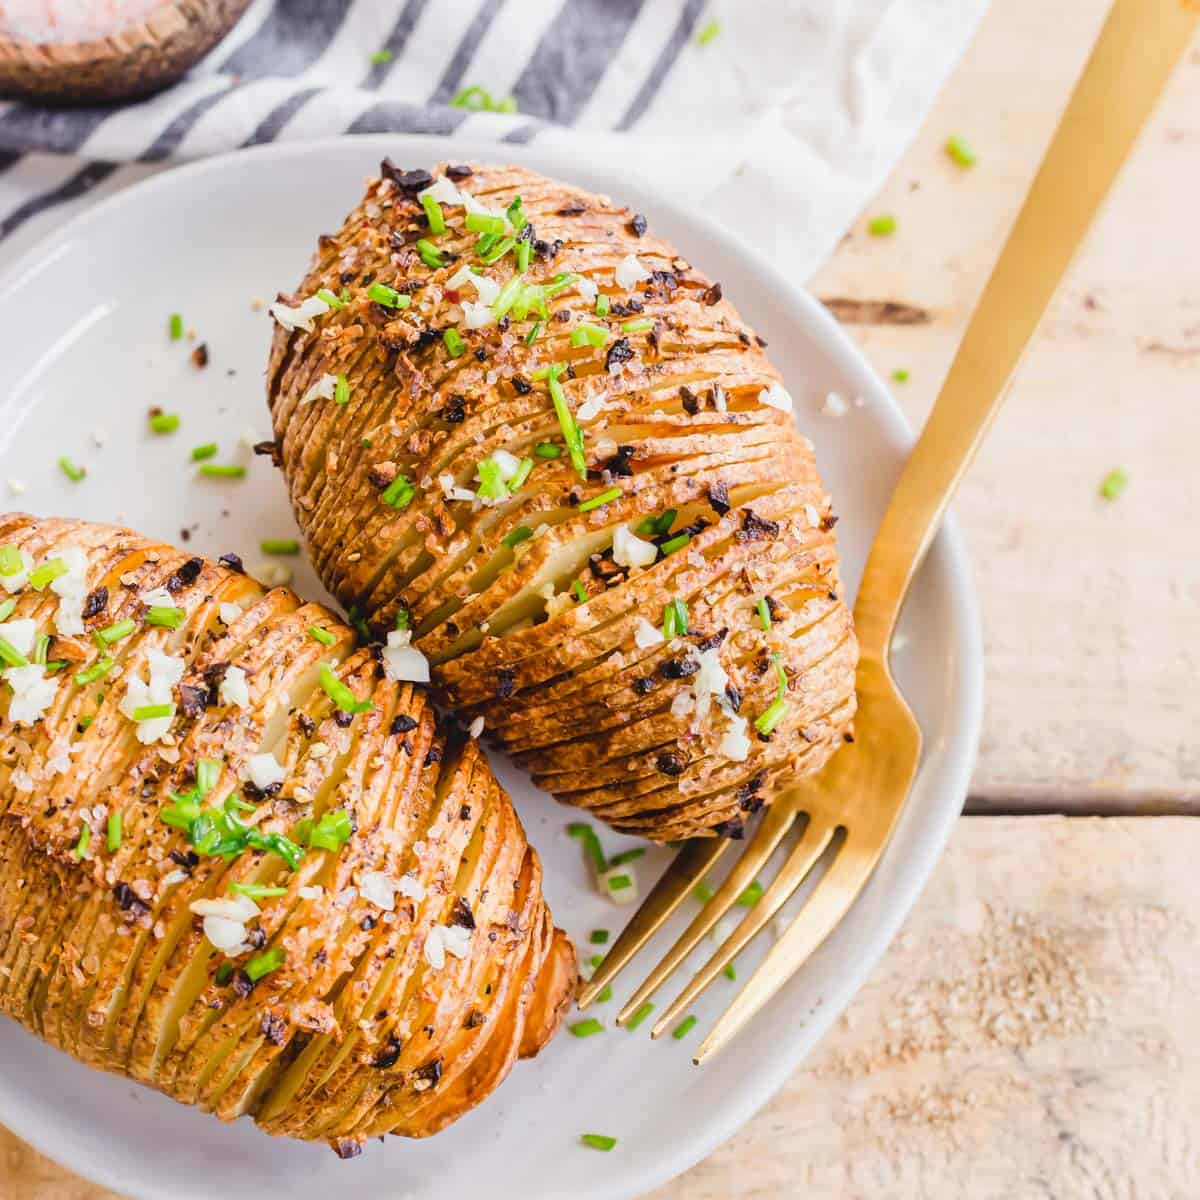 Air fryer hasselback potatoes on a plate garnished with garlic and chives with a fork on the side.